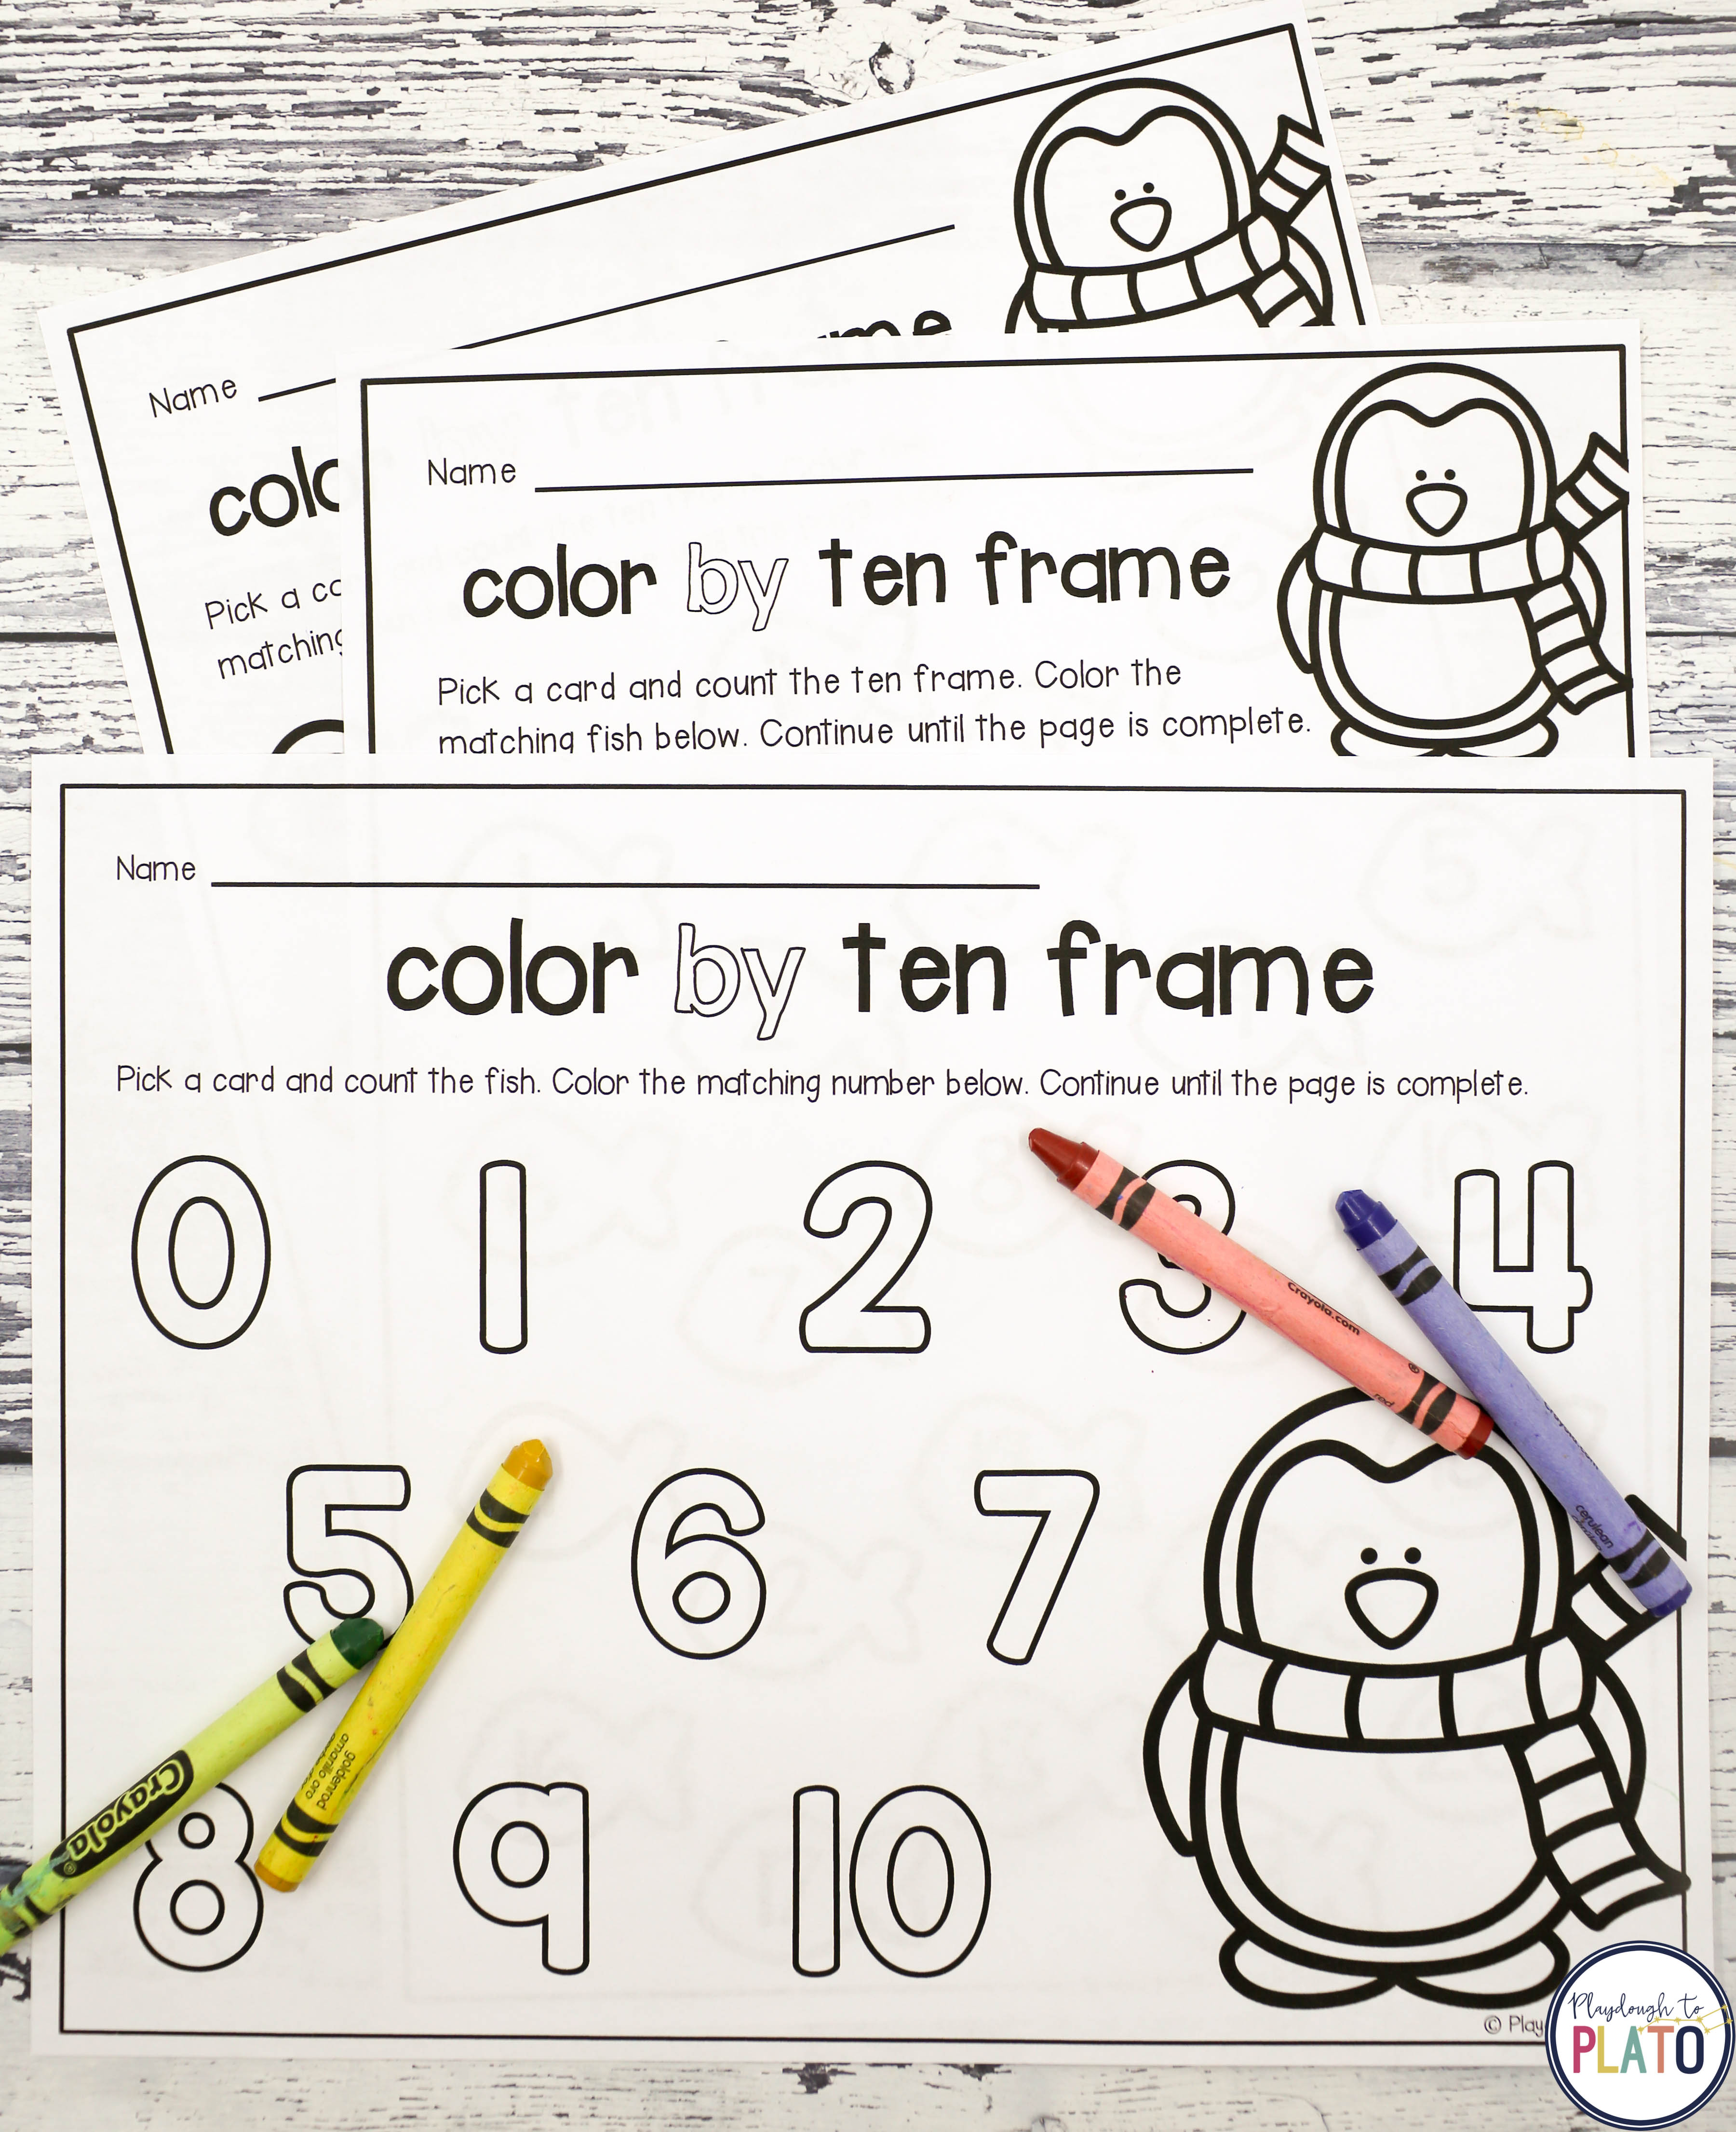 Color by ten frame